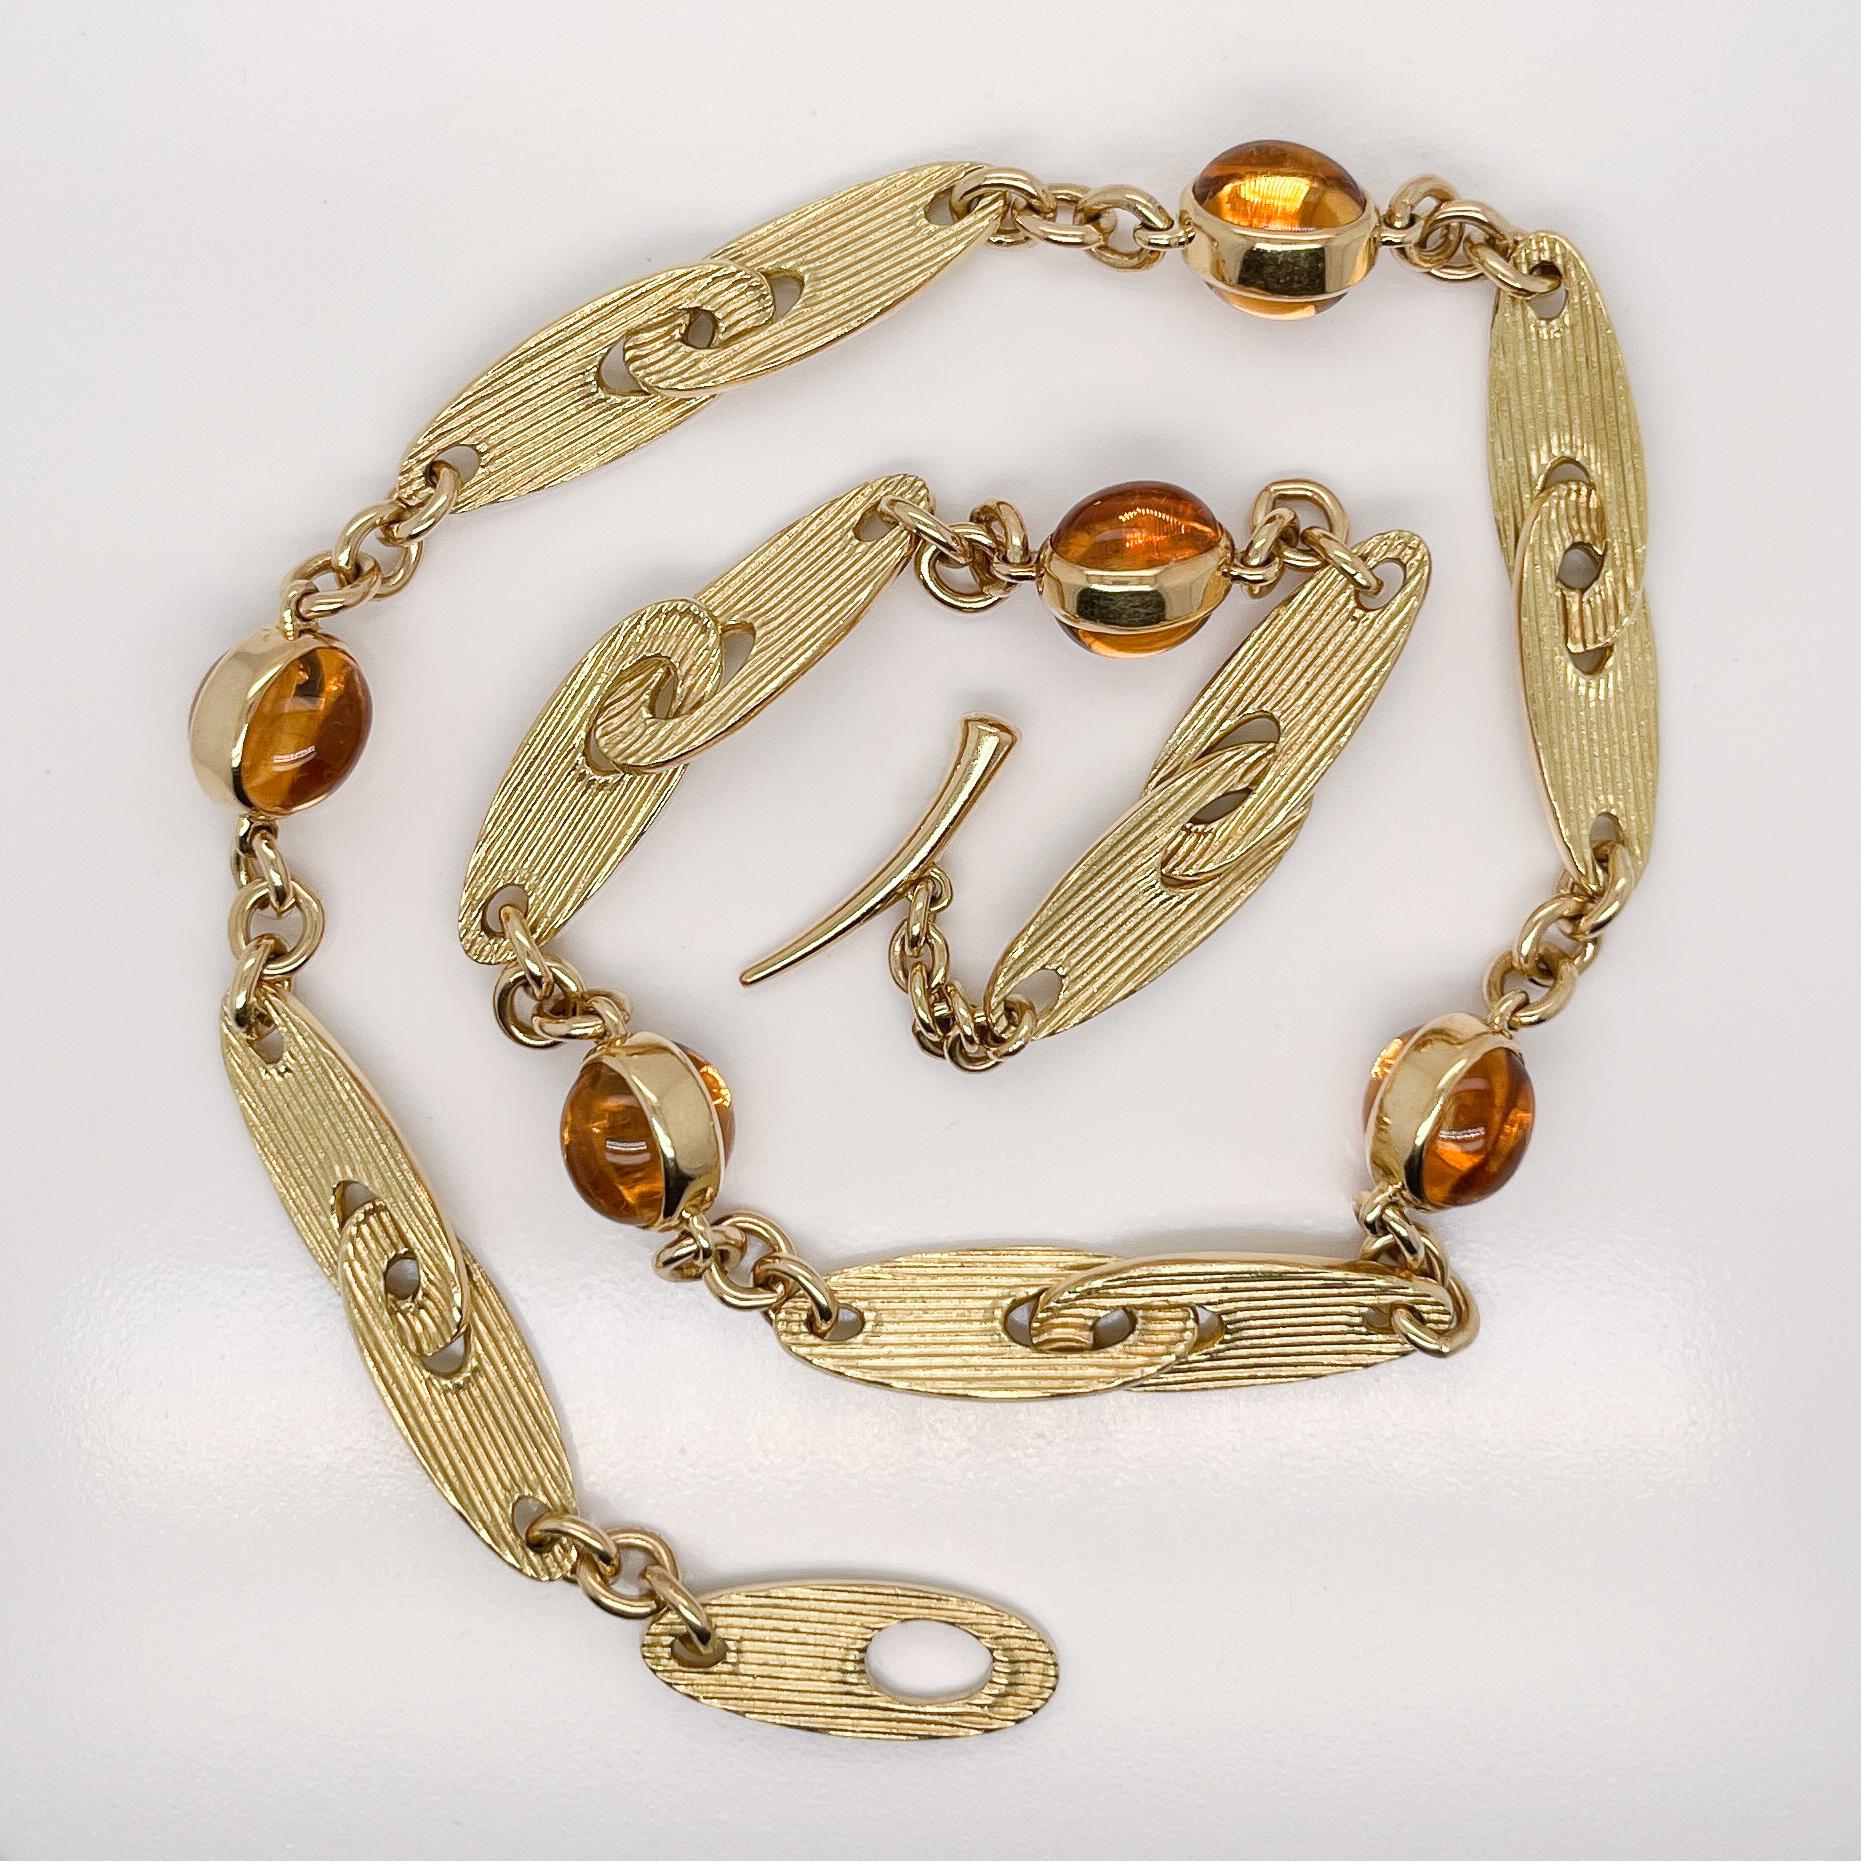 A very fine Paul Morelli necklace.

With smooth oval citrine cabochons set back to back in a 18k gold bezel and alternating between textured interlocking golden ova links. 

Simply a beautiful necklace by Paul Morelli!

Date:
20th Century

Overall